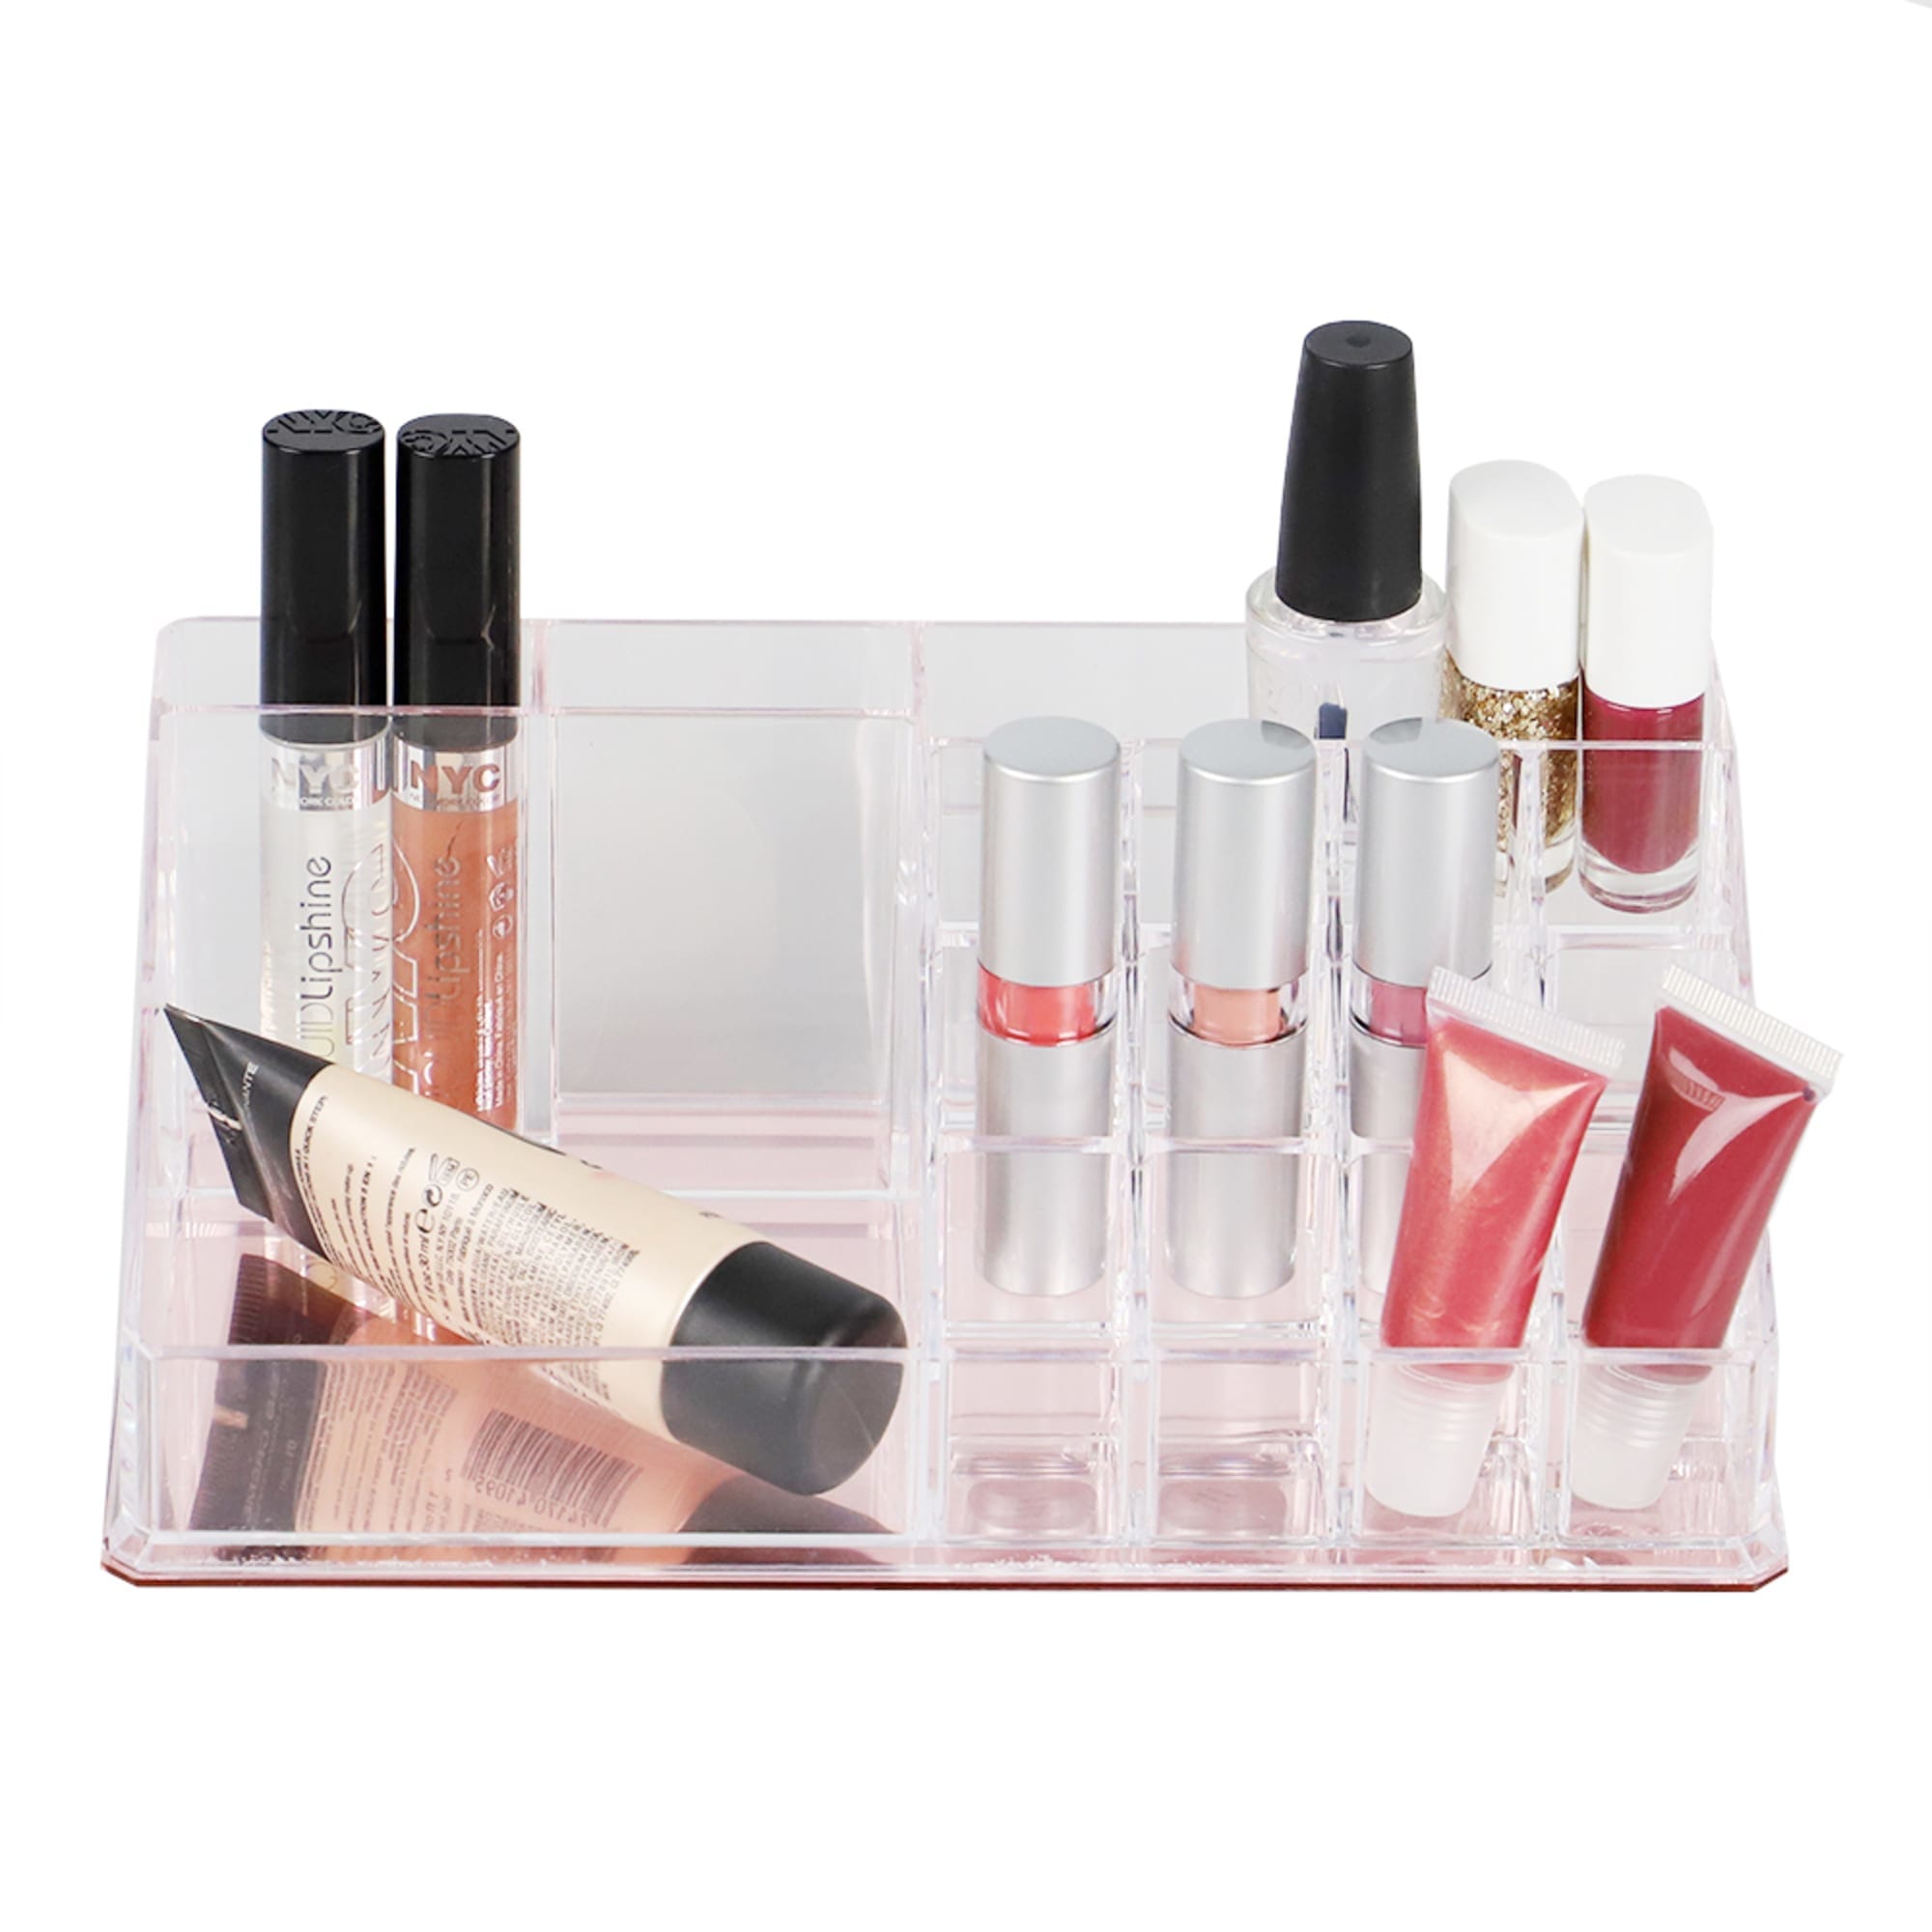 Home Basics Large 16 Compartment Cosmetic Organizer with Rose Bottom $6.00 EACH, CASE PACK OF 12